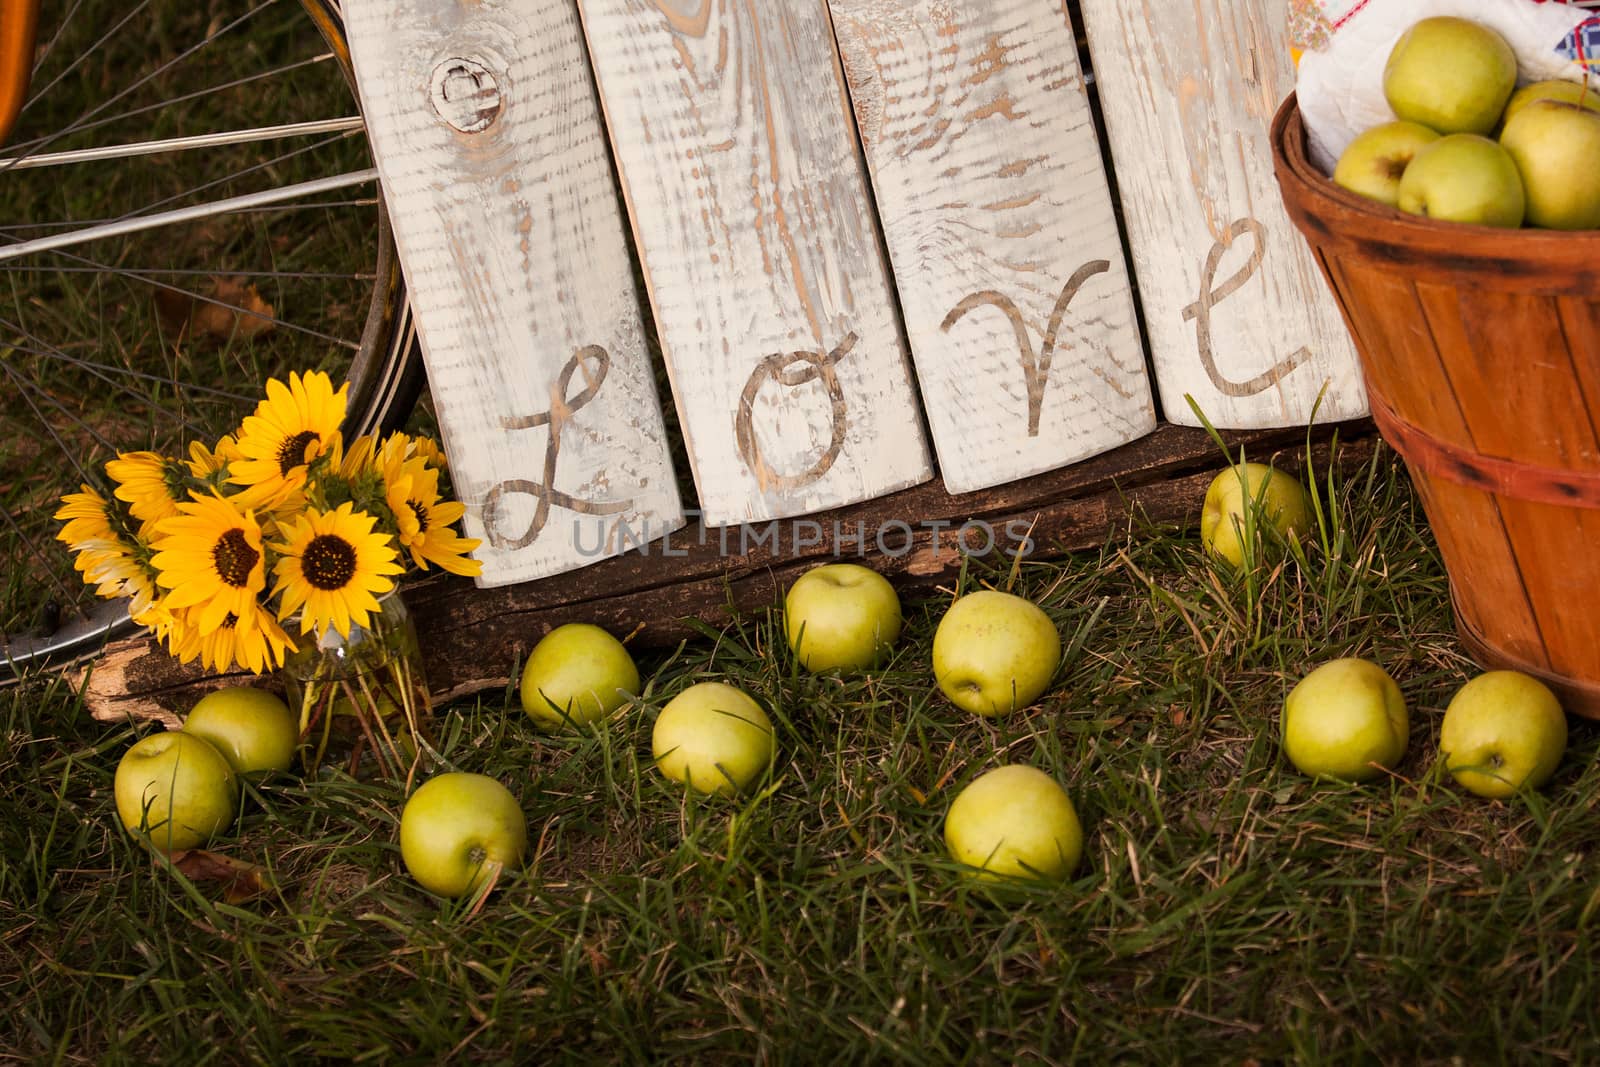 Rustic old wooden sign with the word "love" written on old wood. Apples and daffodils in foreground.